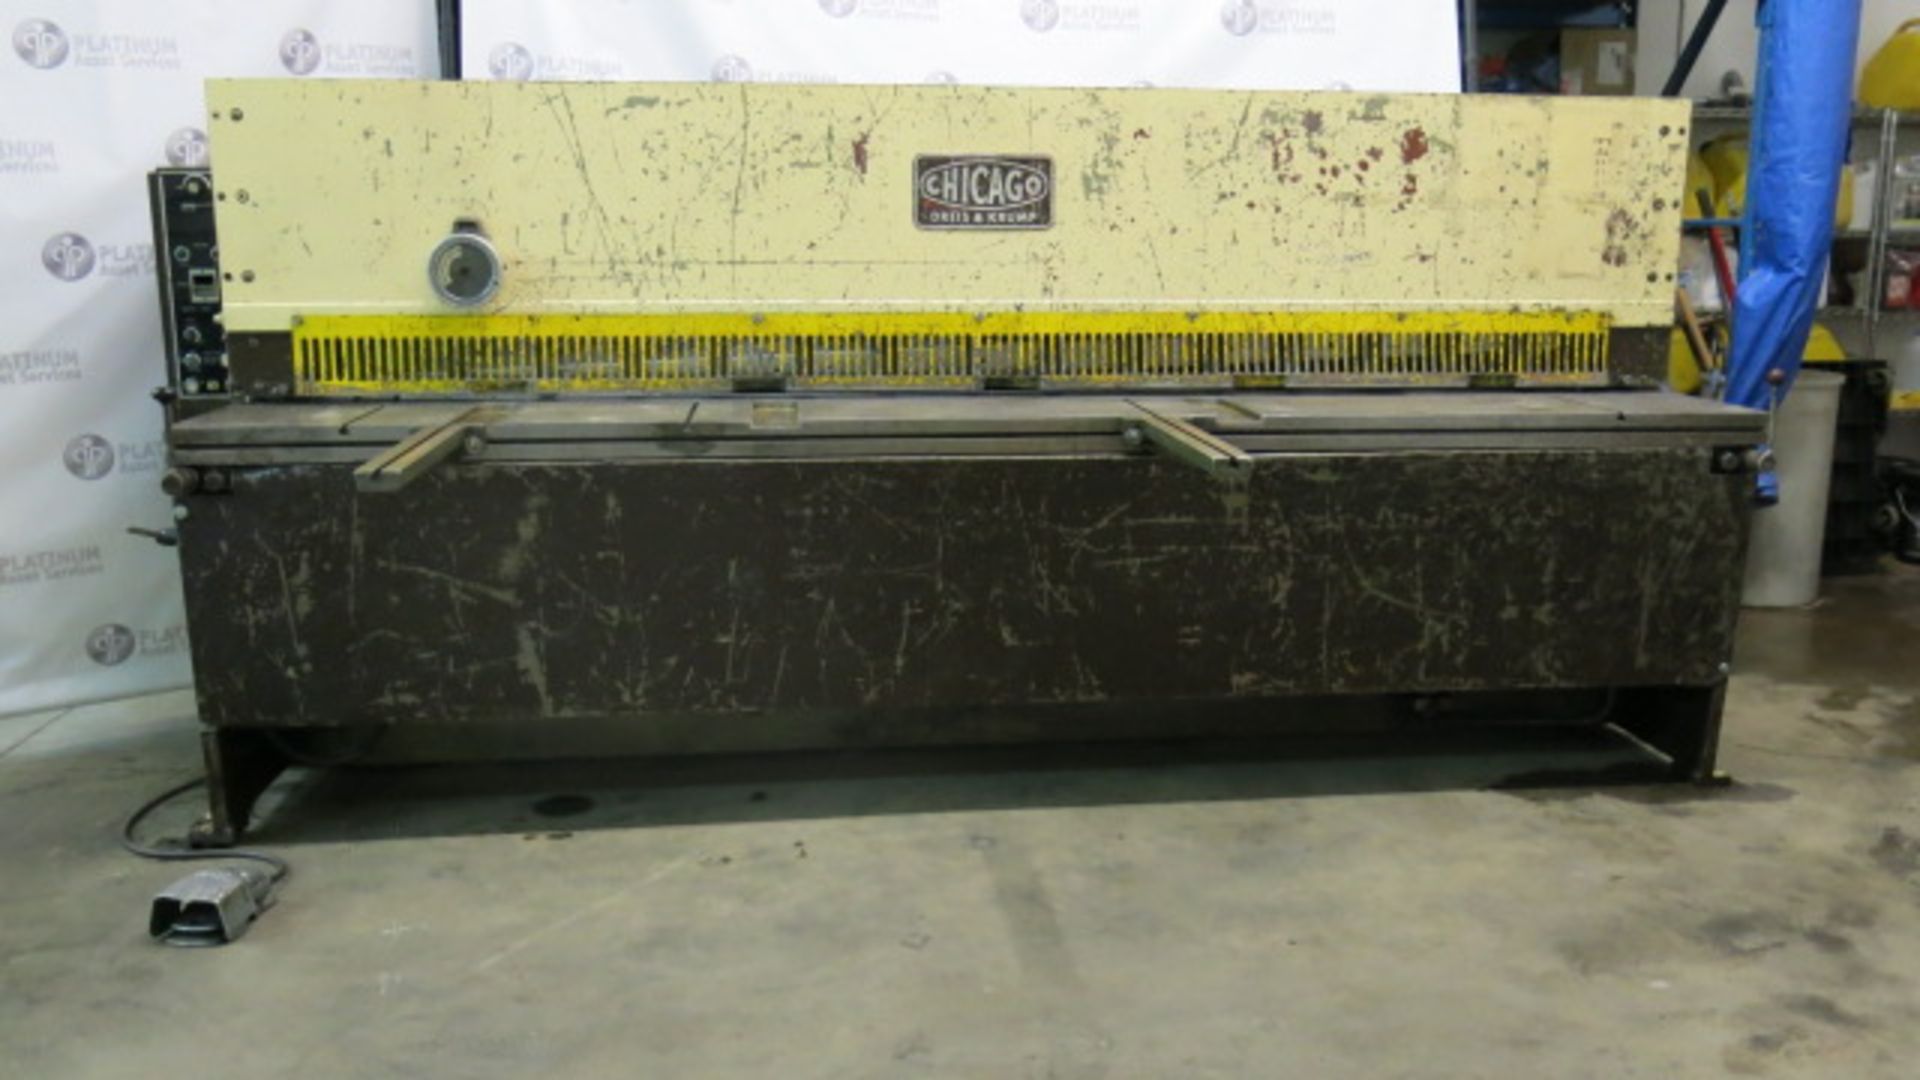 CHICAGO, UA 1250, 10' X 1/4", HYDRAULIC SHEAR, FOPBG, 575/3/60, S/N DS 1288 (LOCATED AT 80 MIDWEST